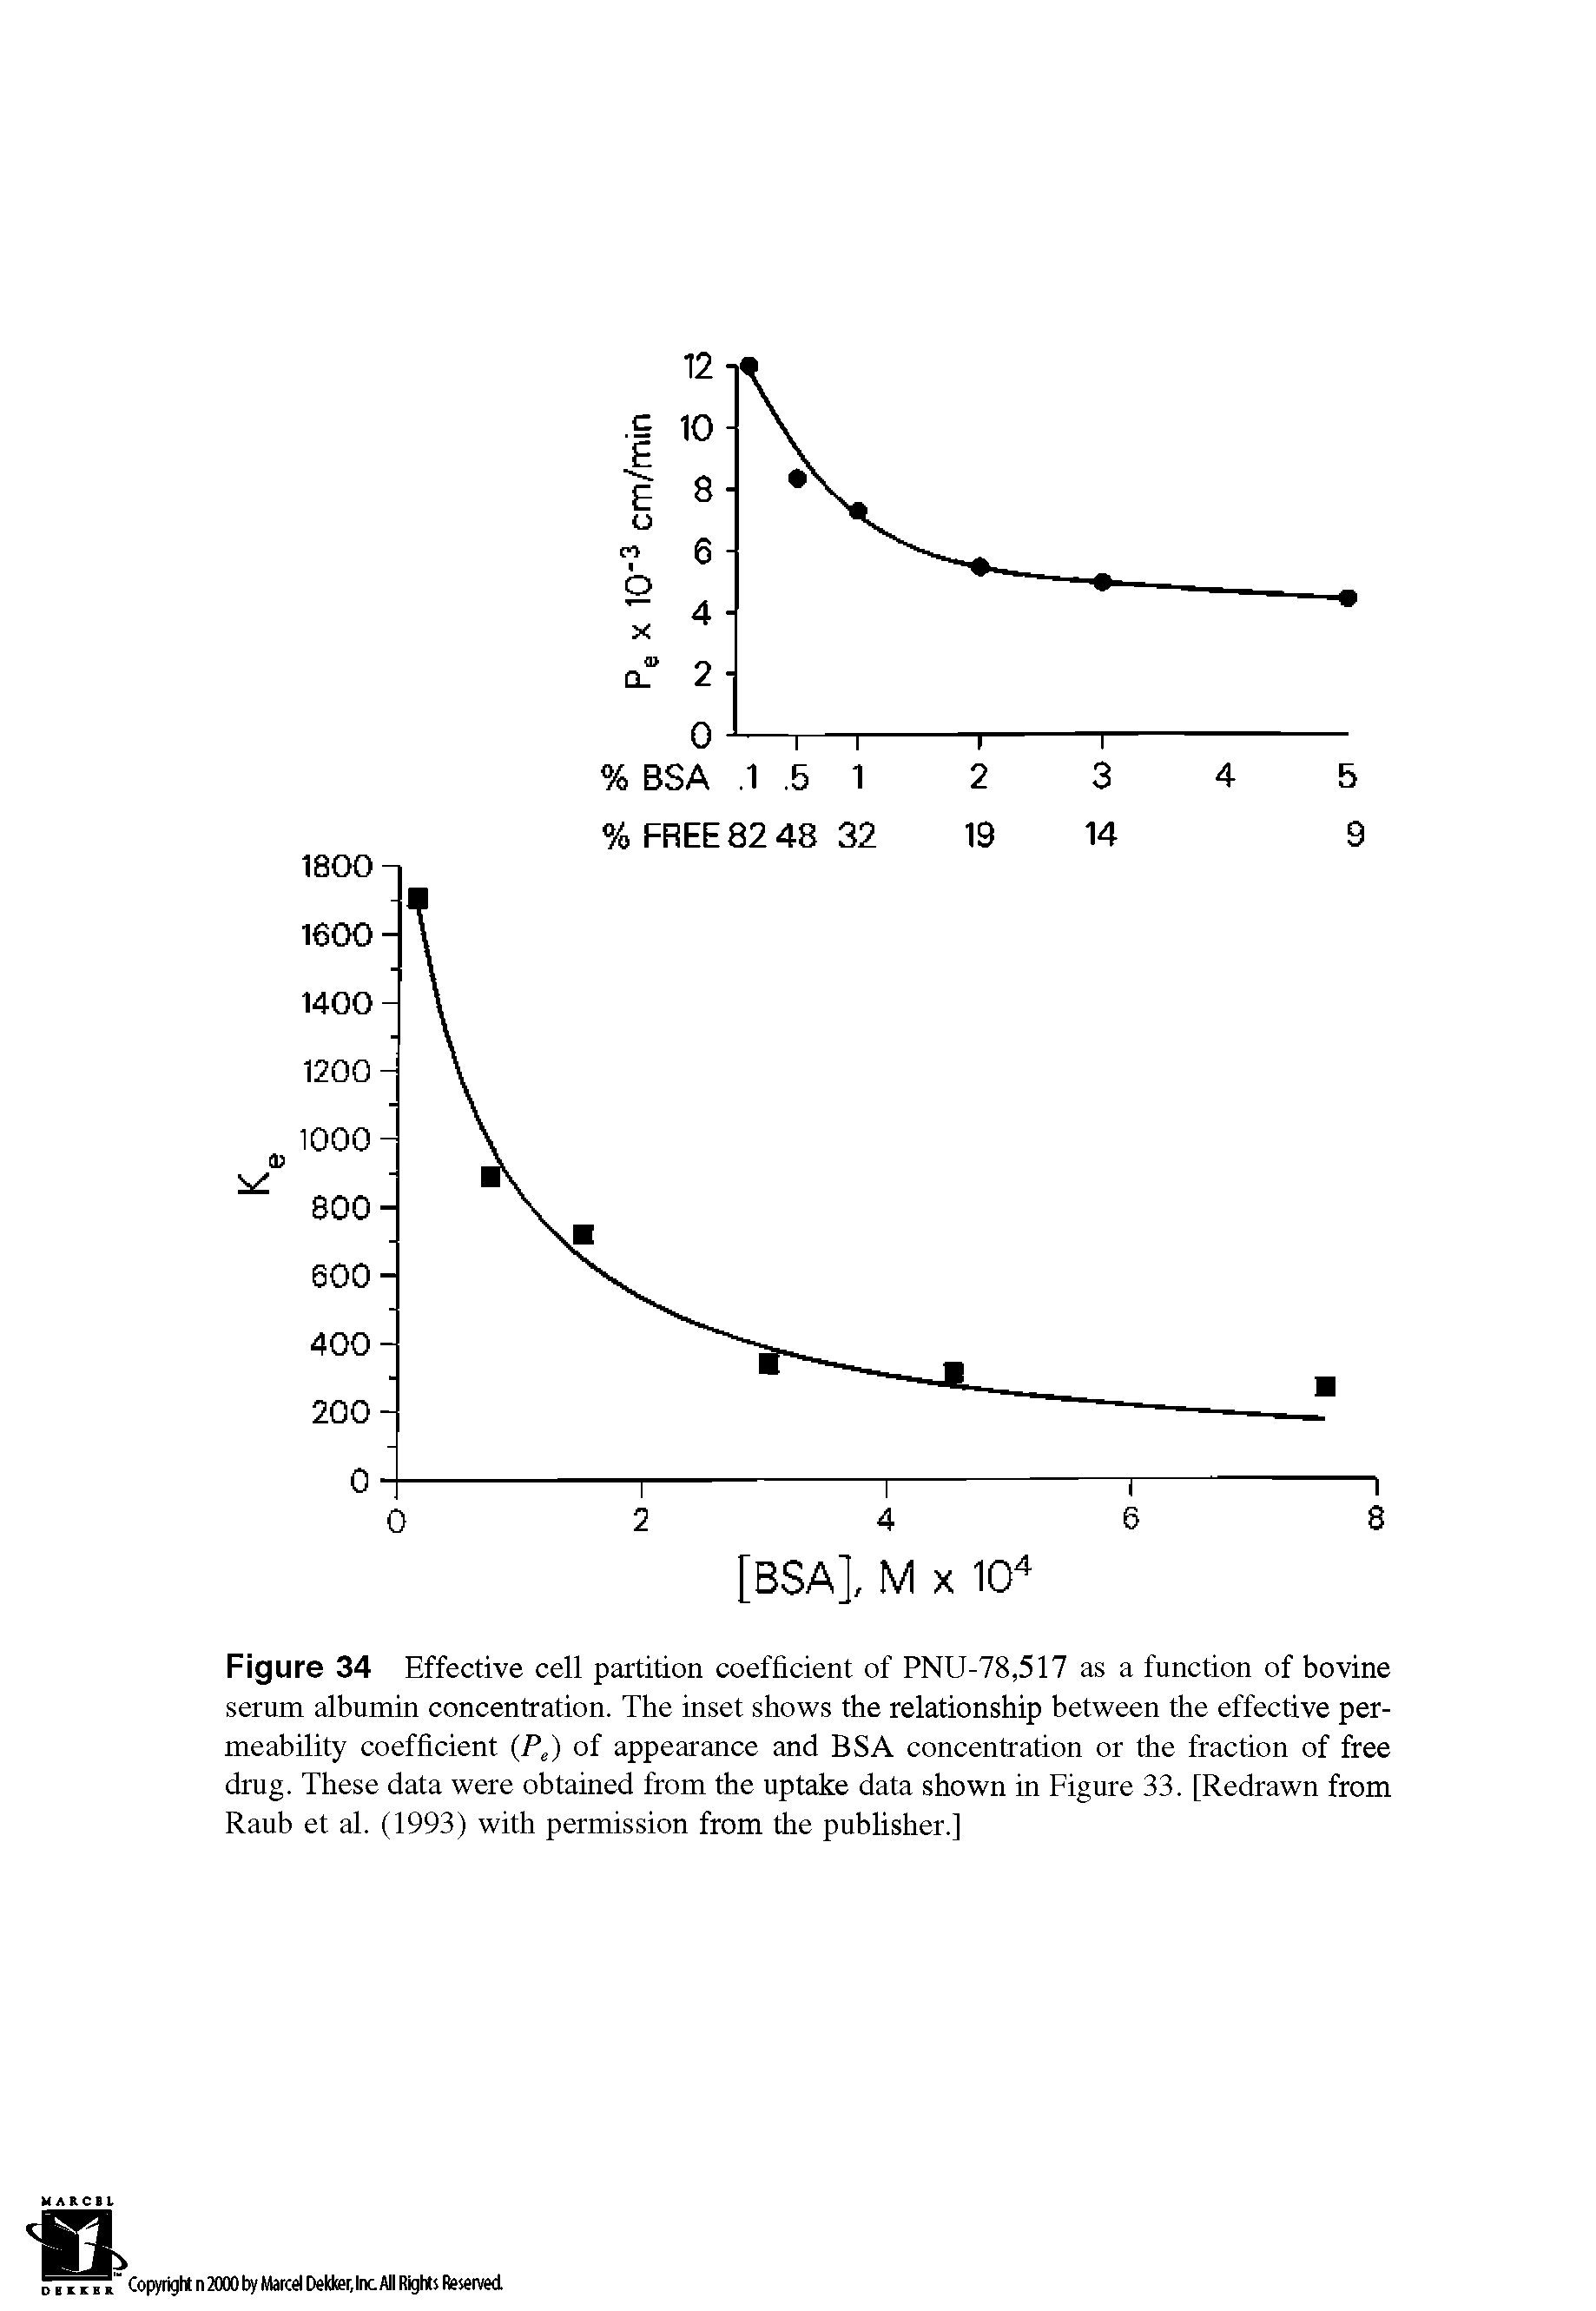 Figure 34 Effective cell partition coefficient of PNU-78,517 as a function of bovine serum albumin concentration. The inset shows the relationship between the effective permeability coefficient (Pe) of appearance and BSA concentration or the fraction of free drug. These data were obtained from the uptake data shown in Figure 33. [Redrawn from Raub et al. (1993) with permission from the publisher.]...